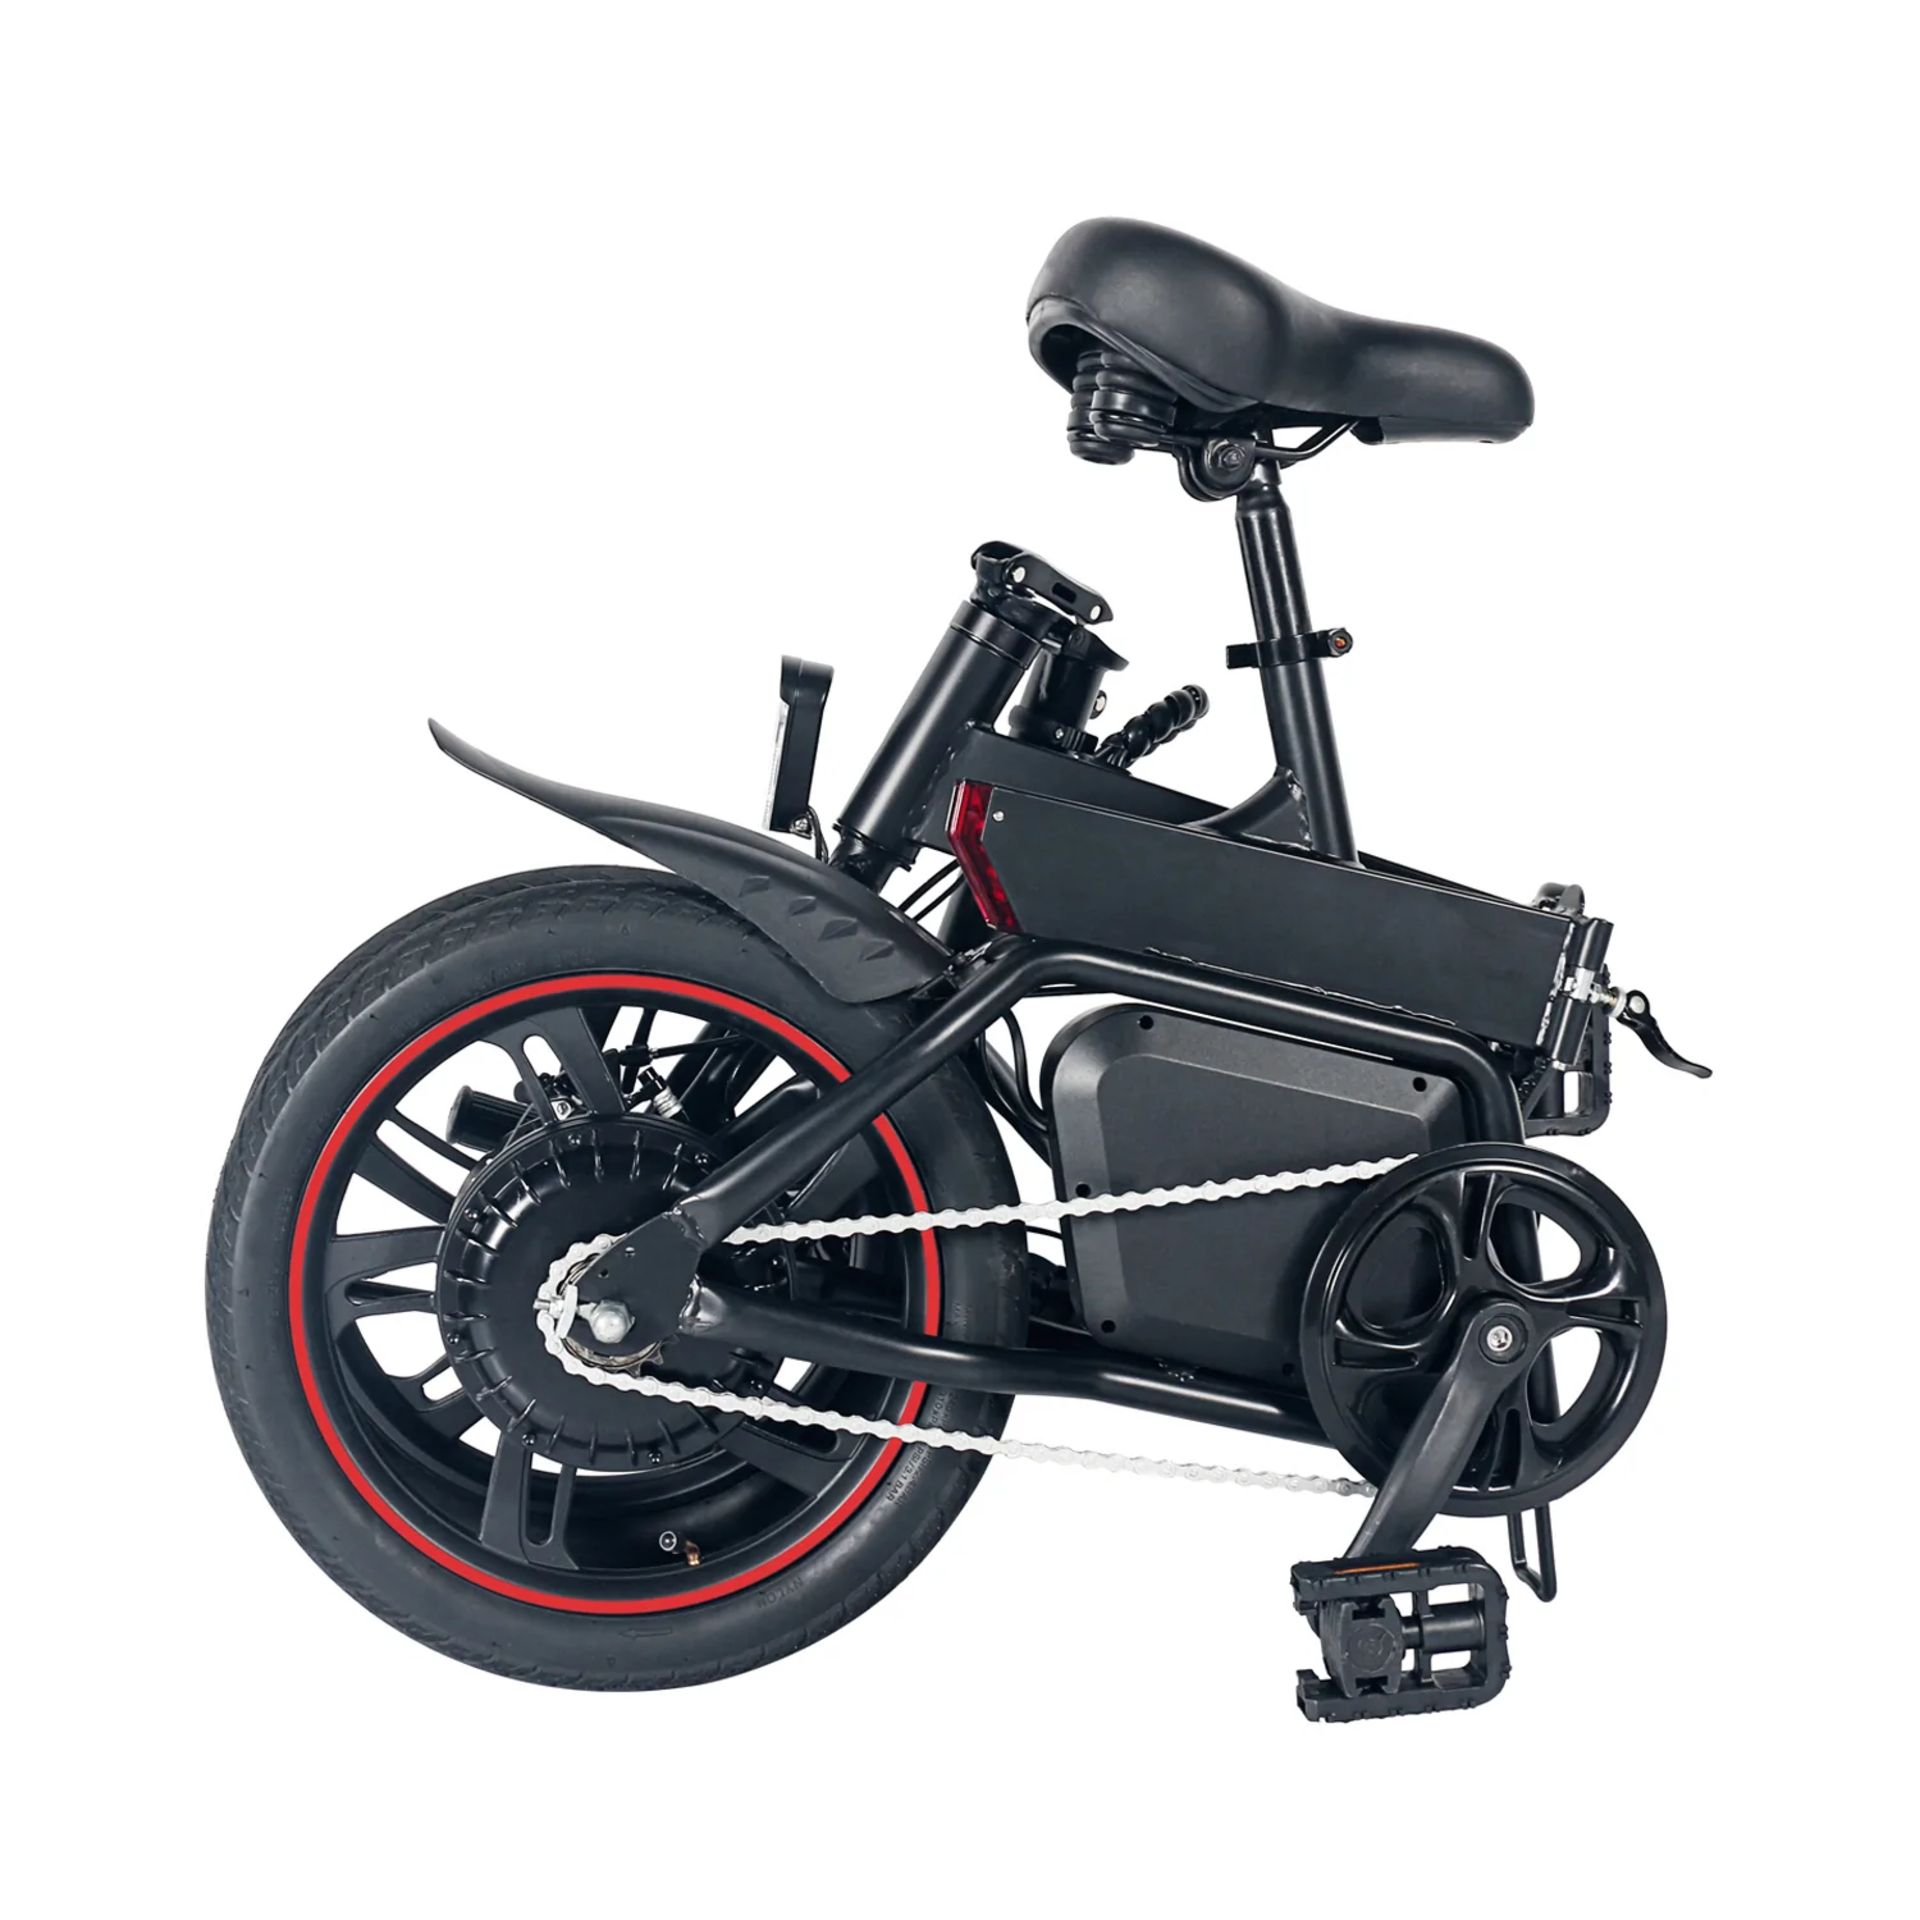 5 X Windgoo B20 Pro Electric Bike. RRP £1,100.99. With 16-inch-wide tires and a frame of upgraded